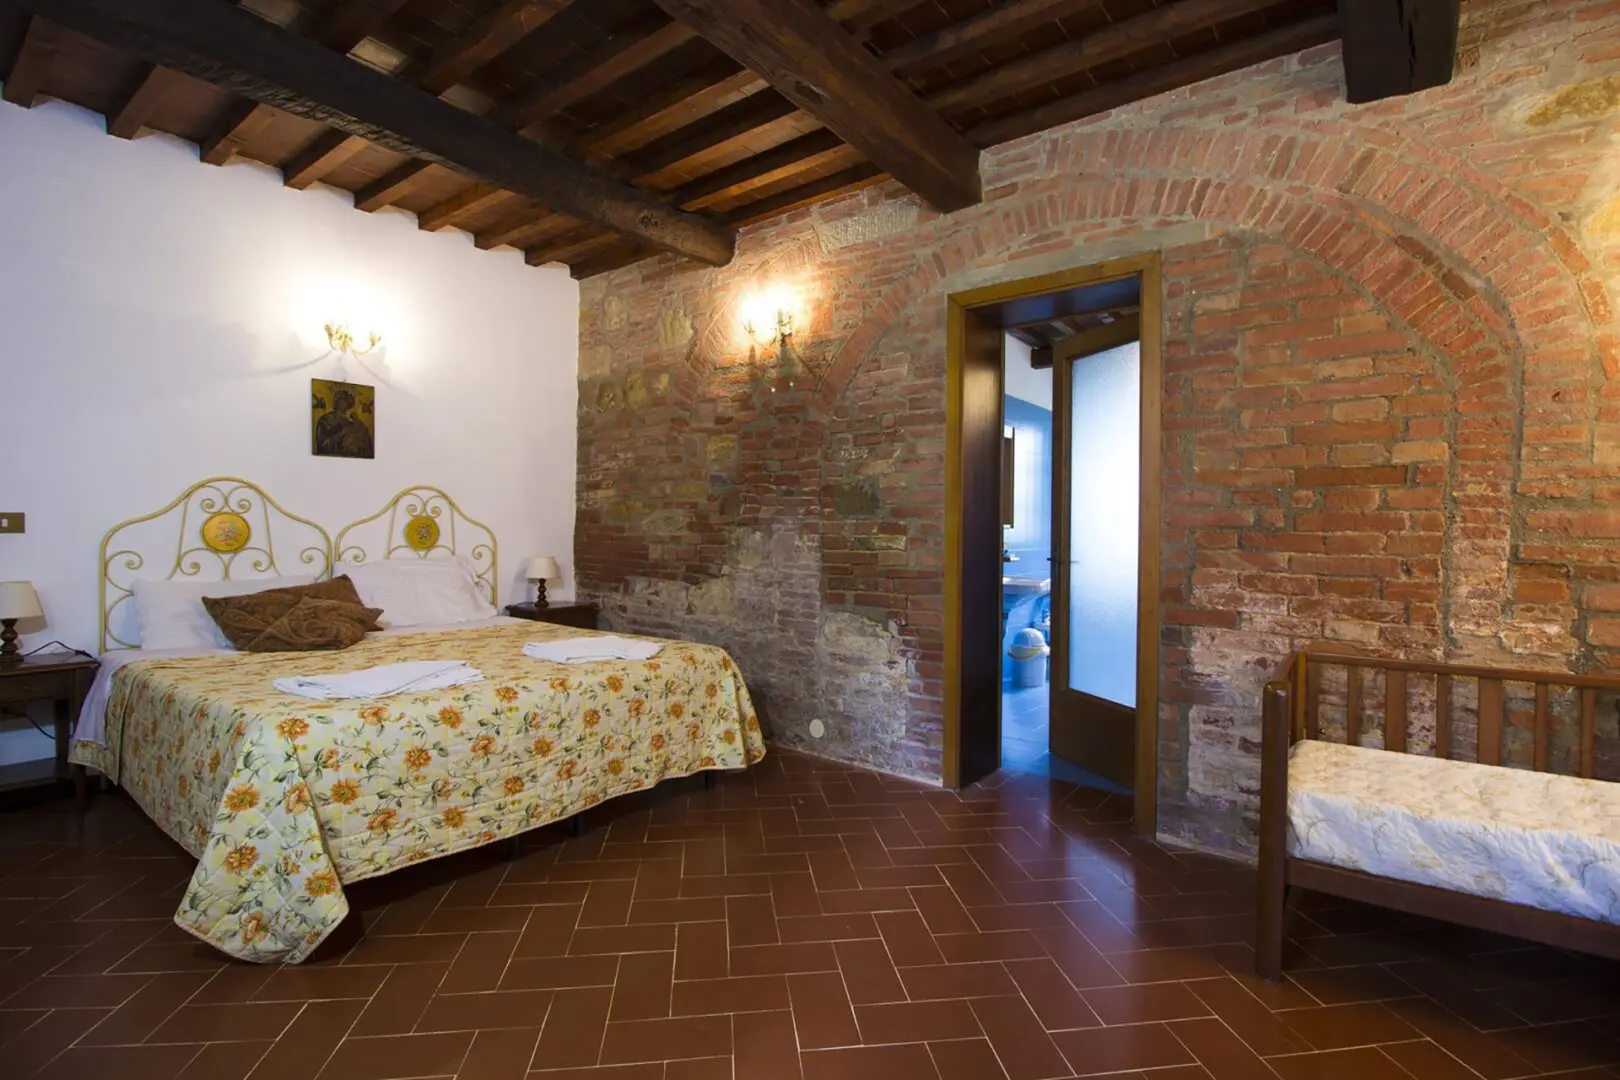 A bedroom with brick walls and wooden floors.